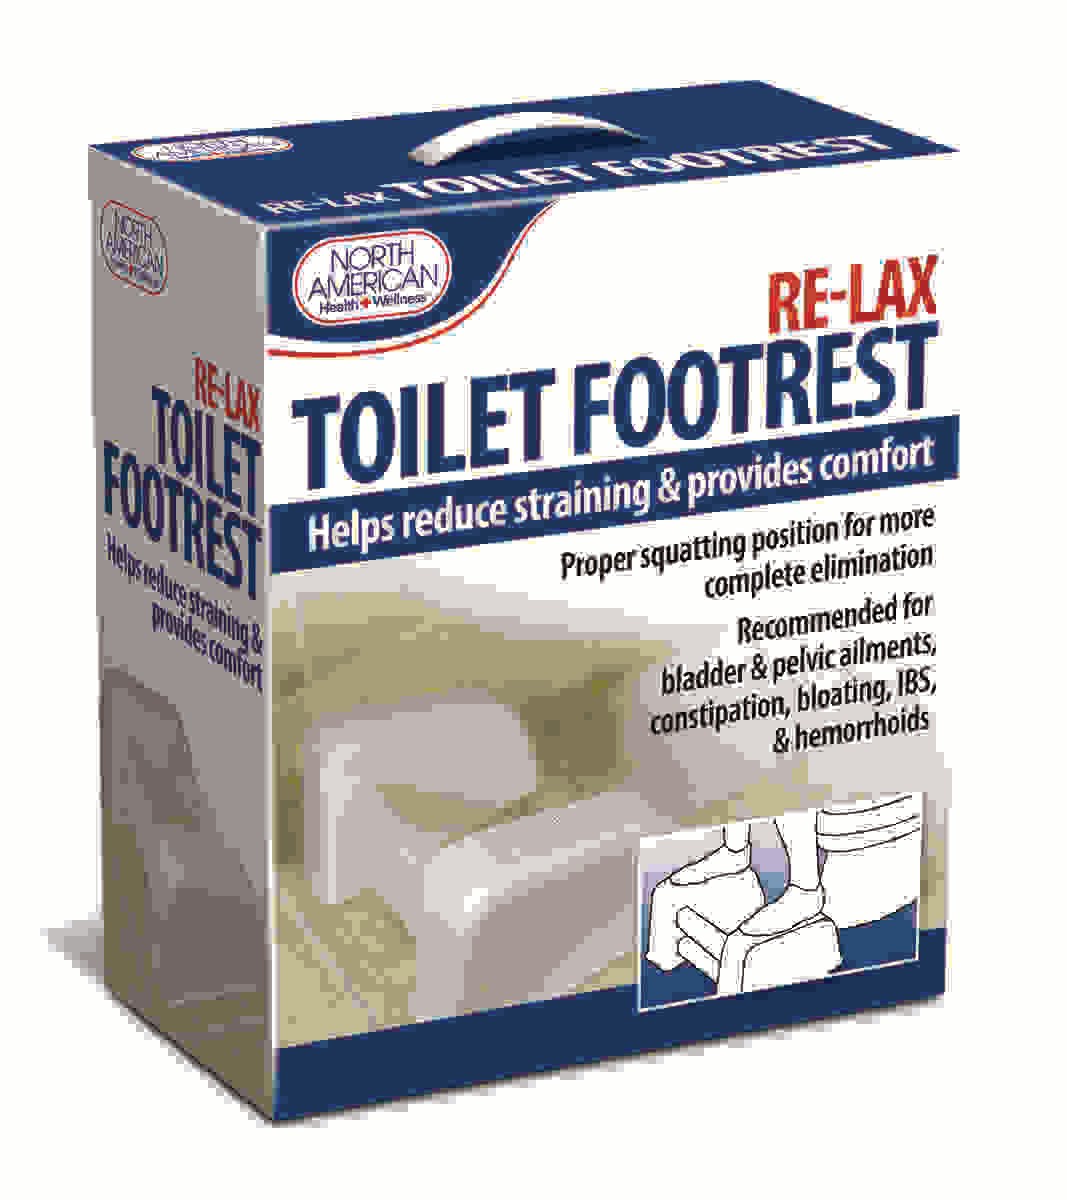 American JB6398 Re-Lax Toilet Foot Rest That Helps Position